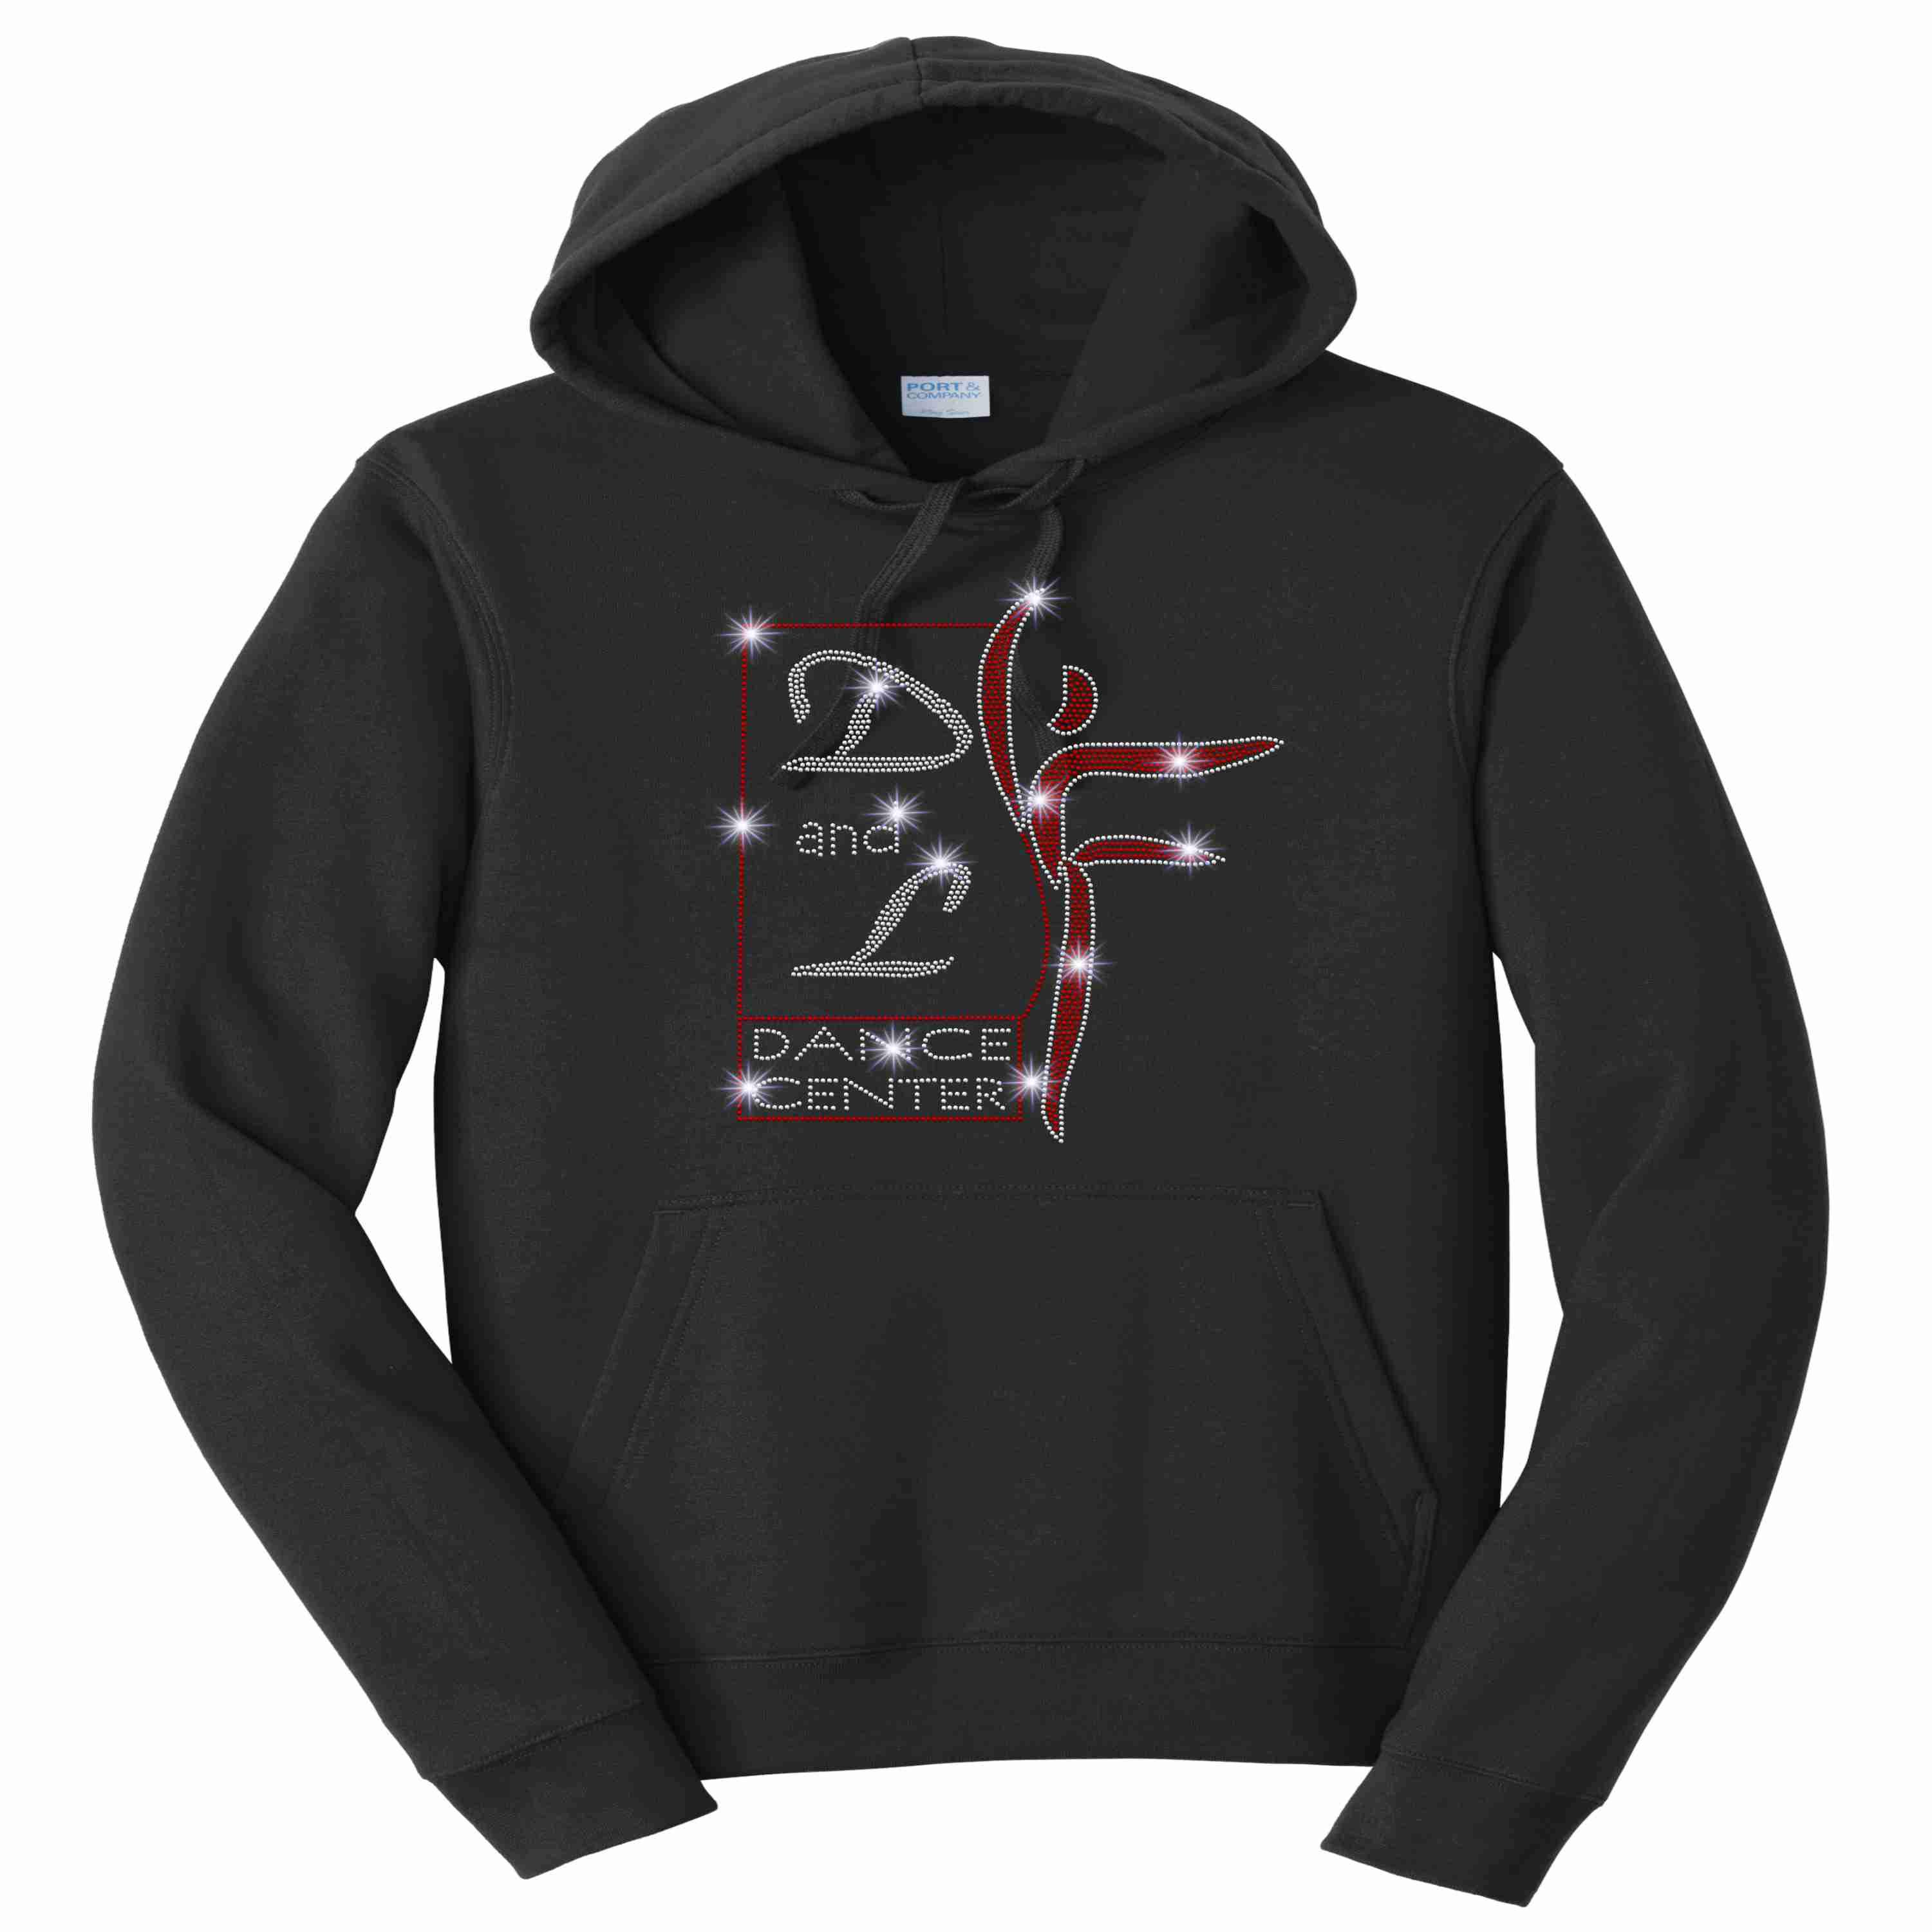 D and L Dance Center Adult and Youth Bling Hooded Sweatshirt-Black Hoodie Sweatshirt Becky's Boutique Youth XS 